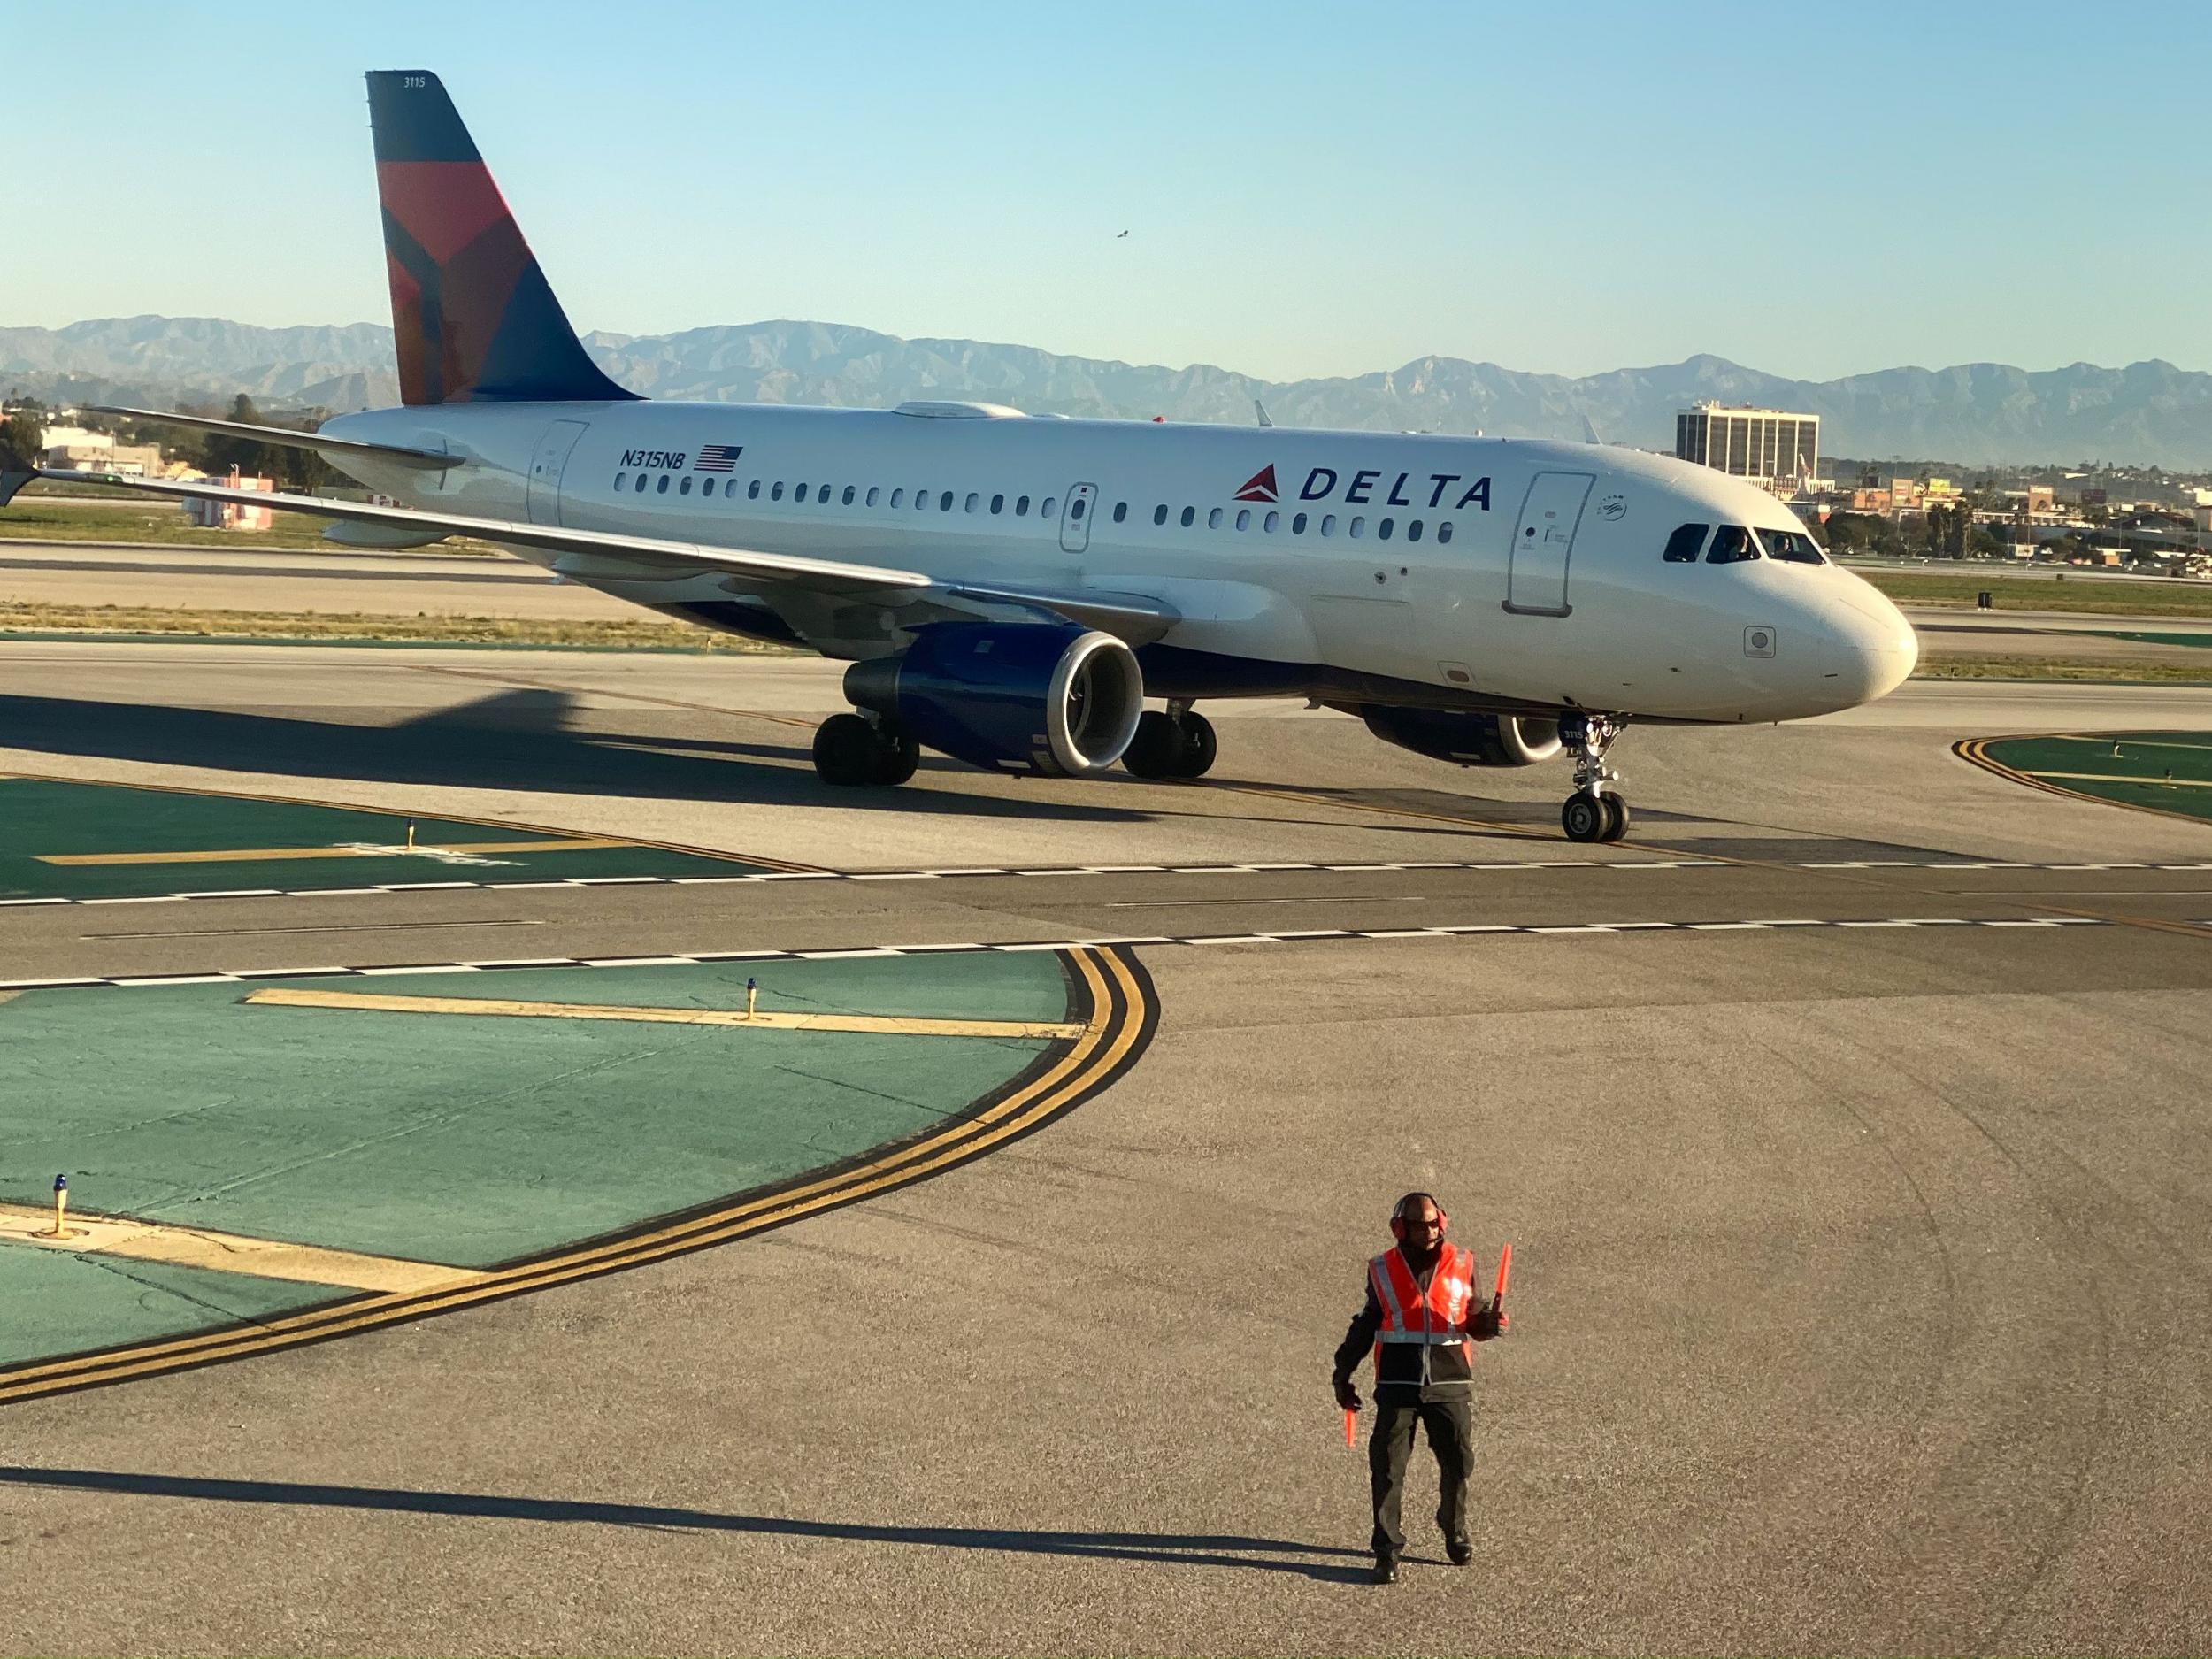 A Delta Air Lines jet at Los Angeles International Airport